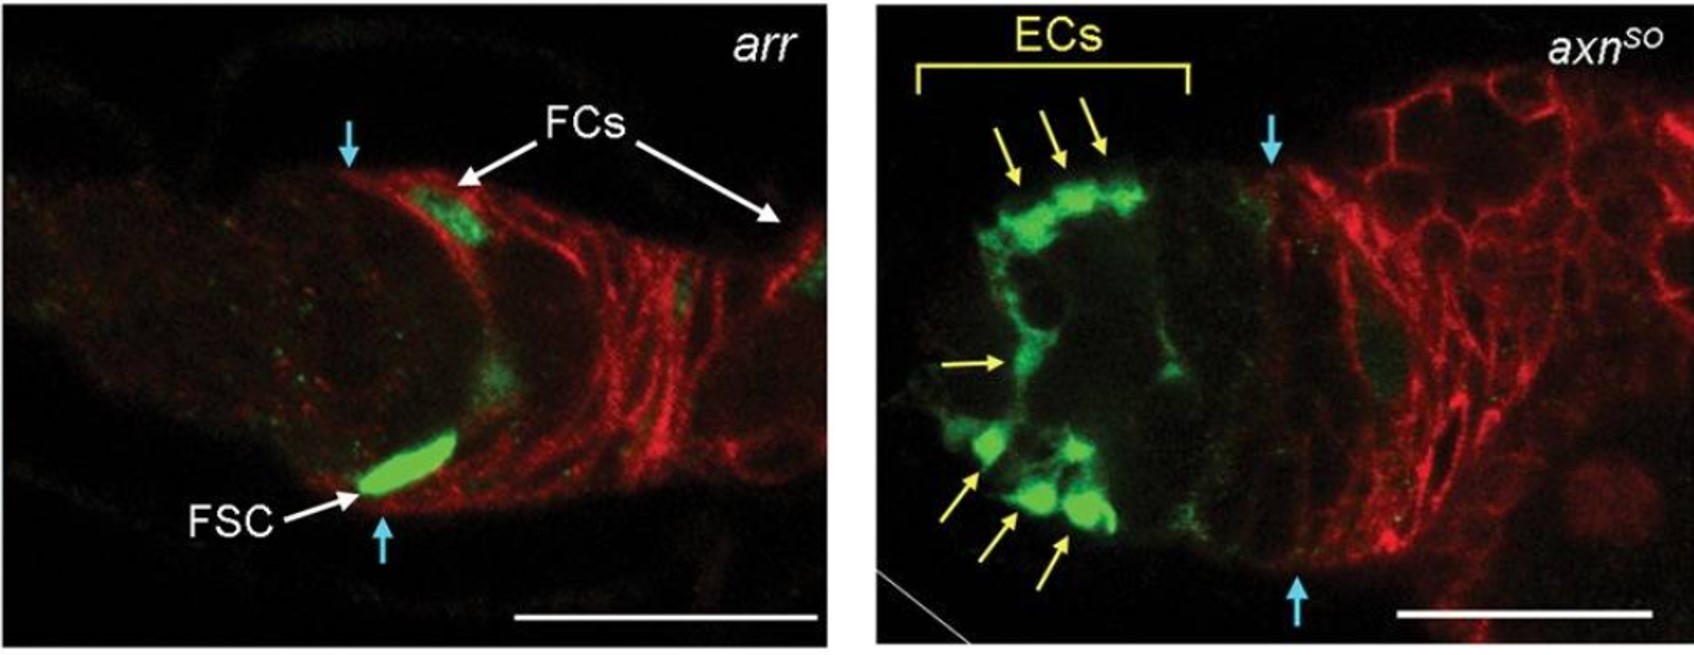 Low and high Wnt signaling affects FSC location and EC production